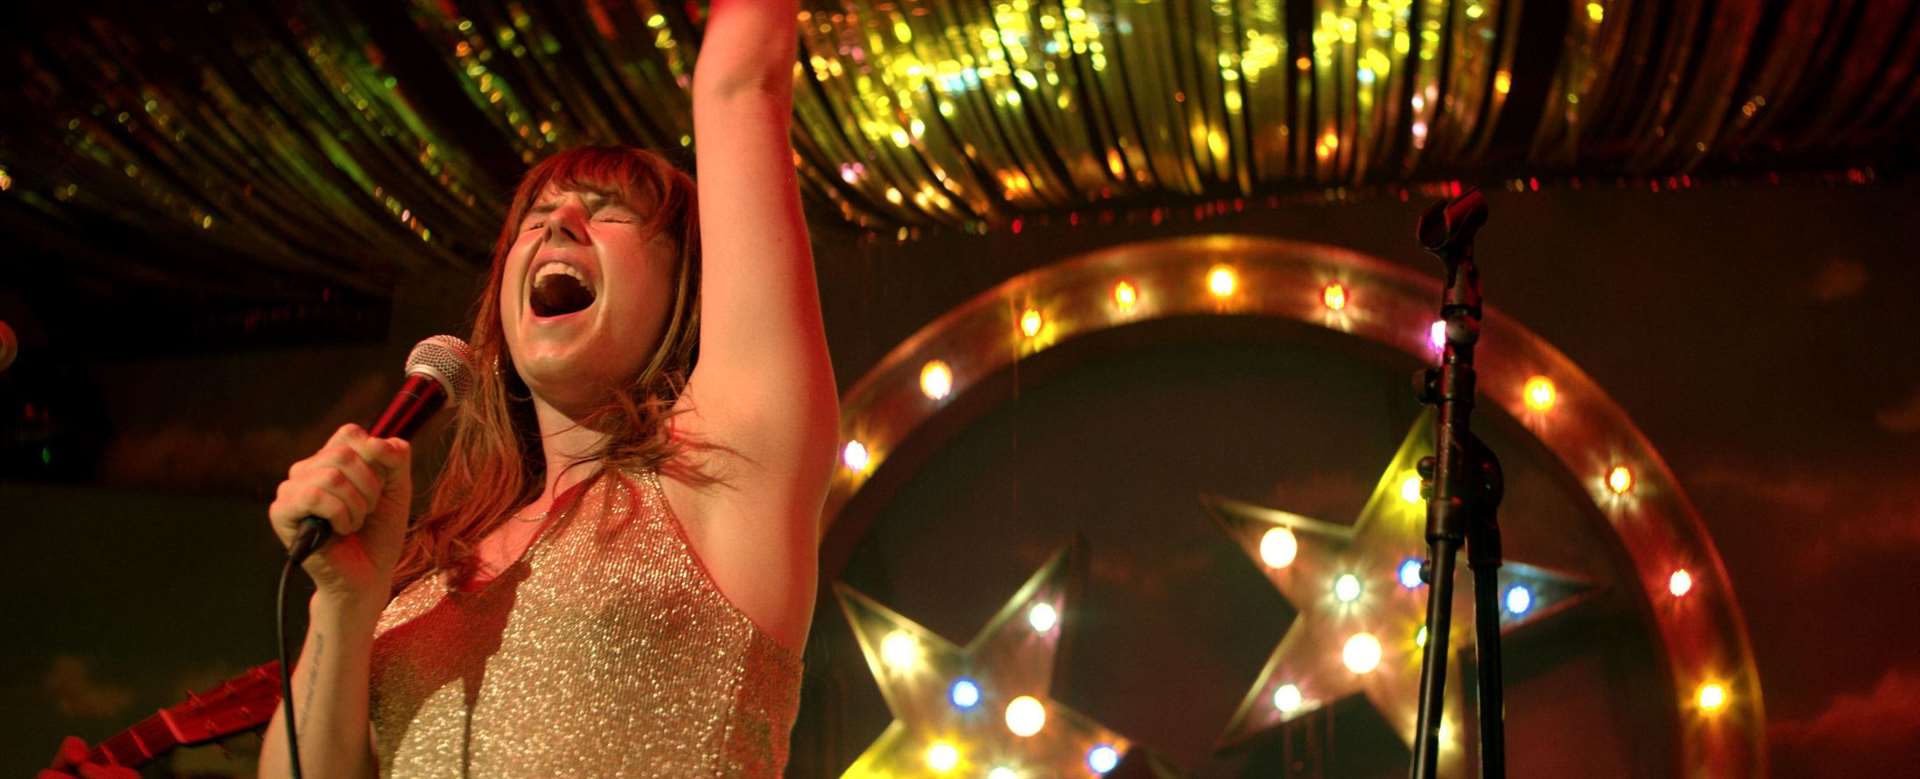 Jessie Buckley as Rose-Lynn Harlan in Wild Rose Picture: Entertainment One